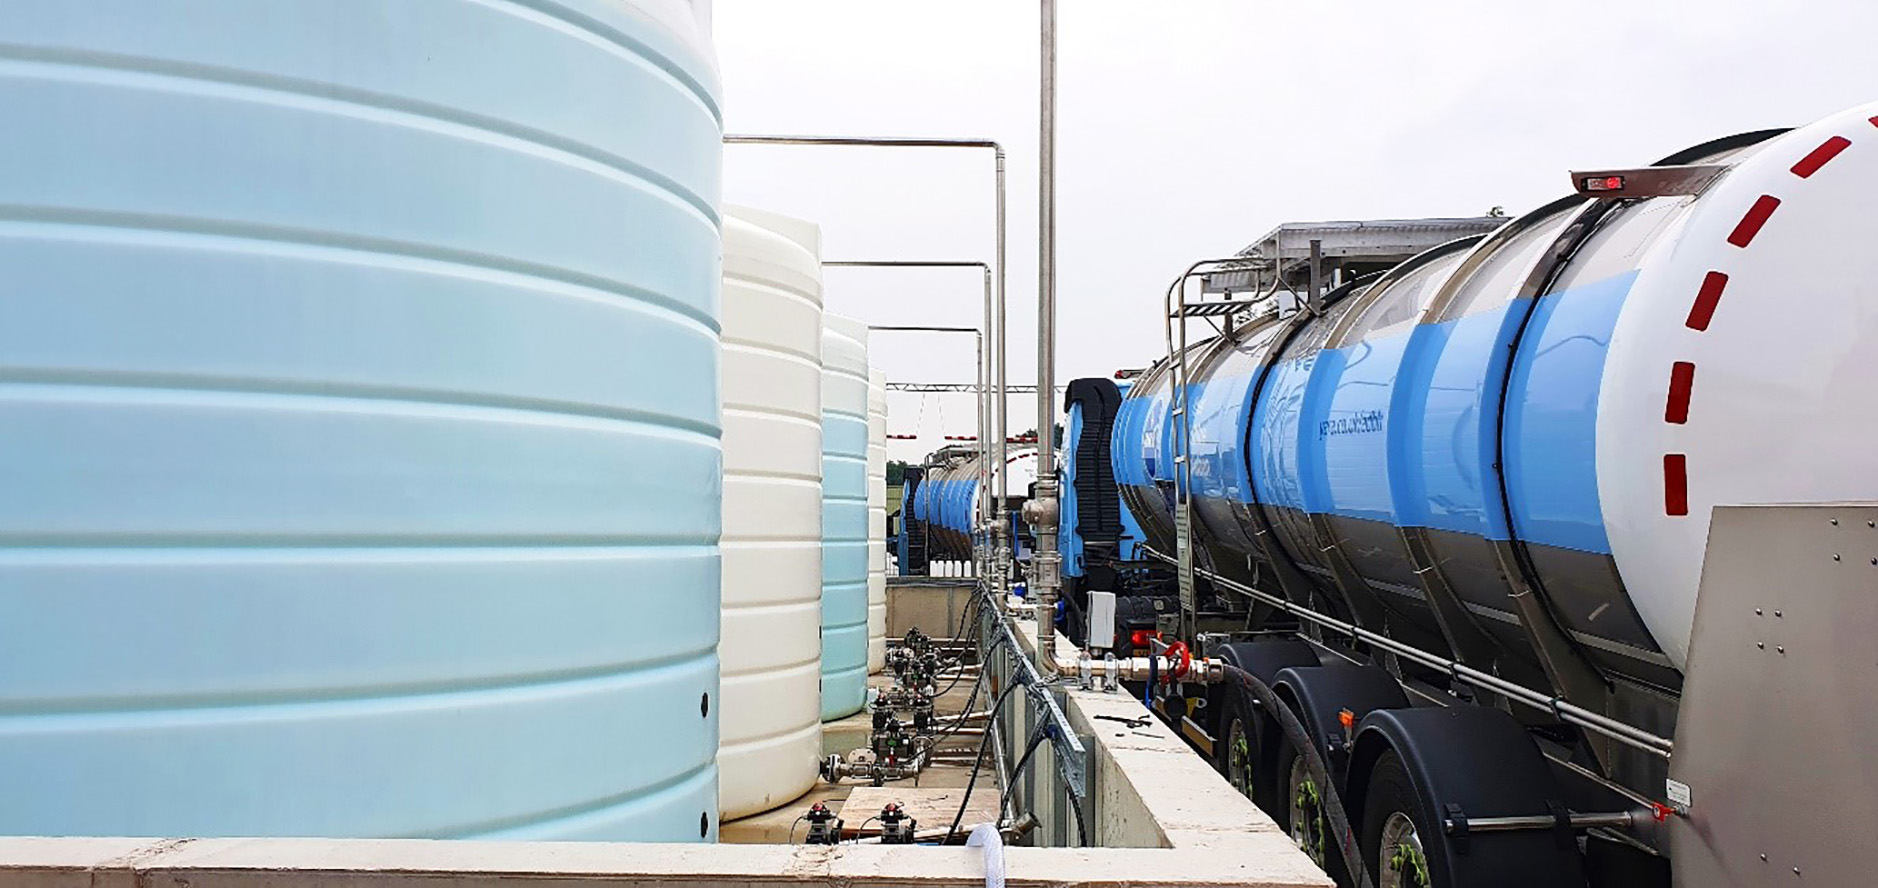 Emissco has announced the addition of a 120,000-litre capacity AdBlue tank farm at its filling plant